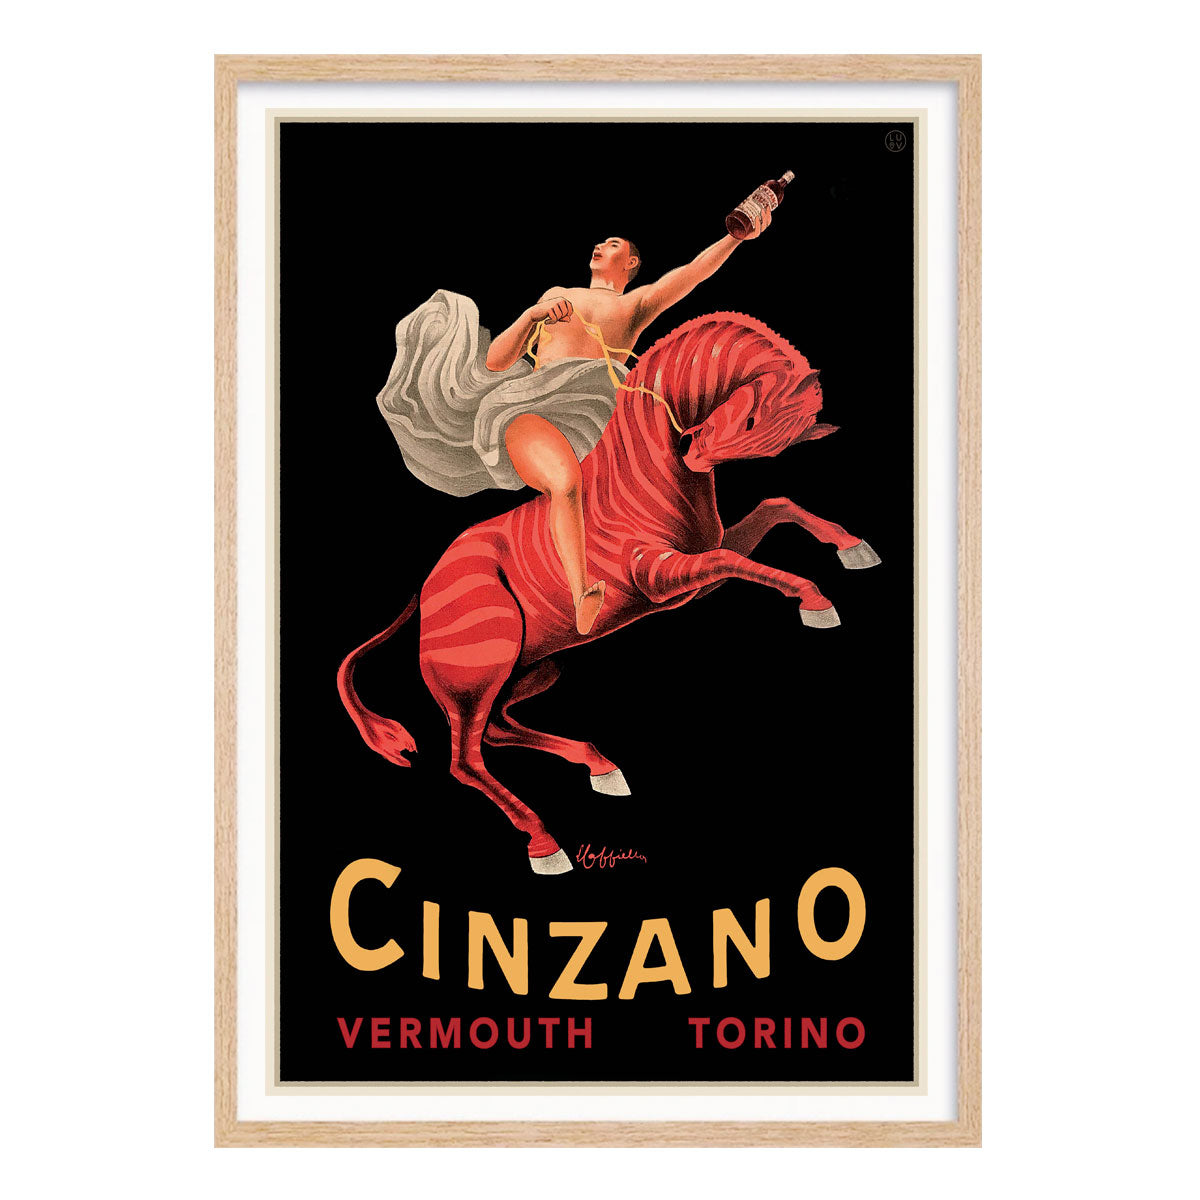 Cinzano Vermouth vintage advertising poster print in oak frame from Places We Luv